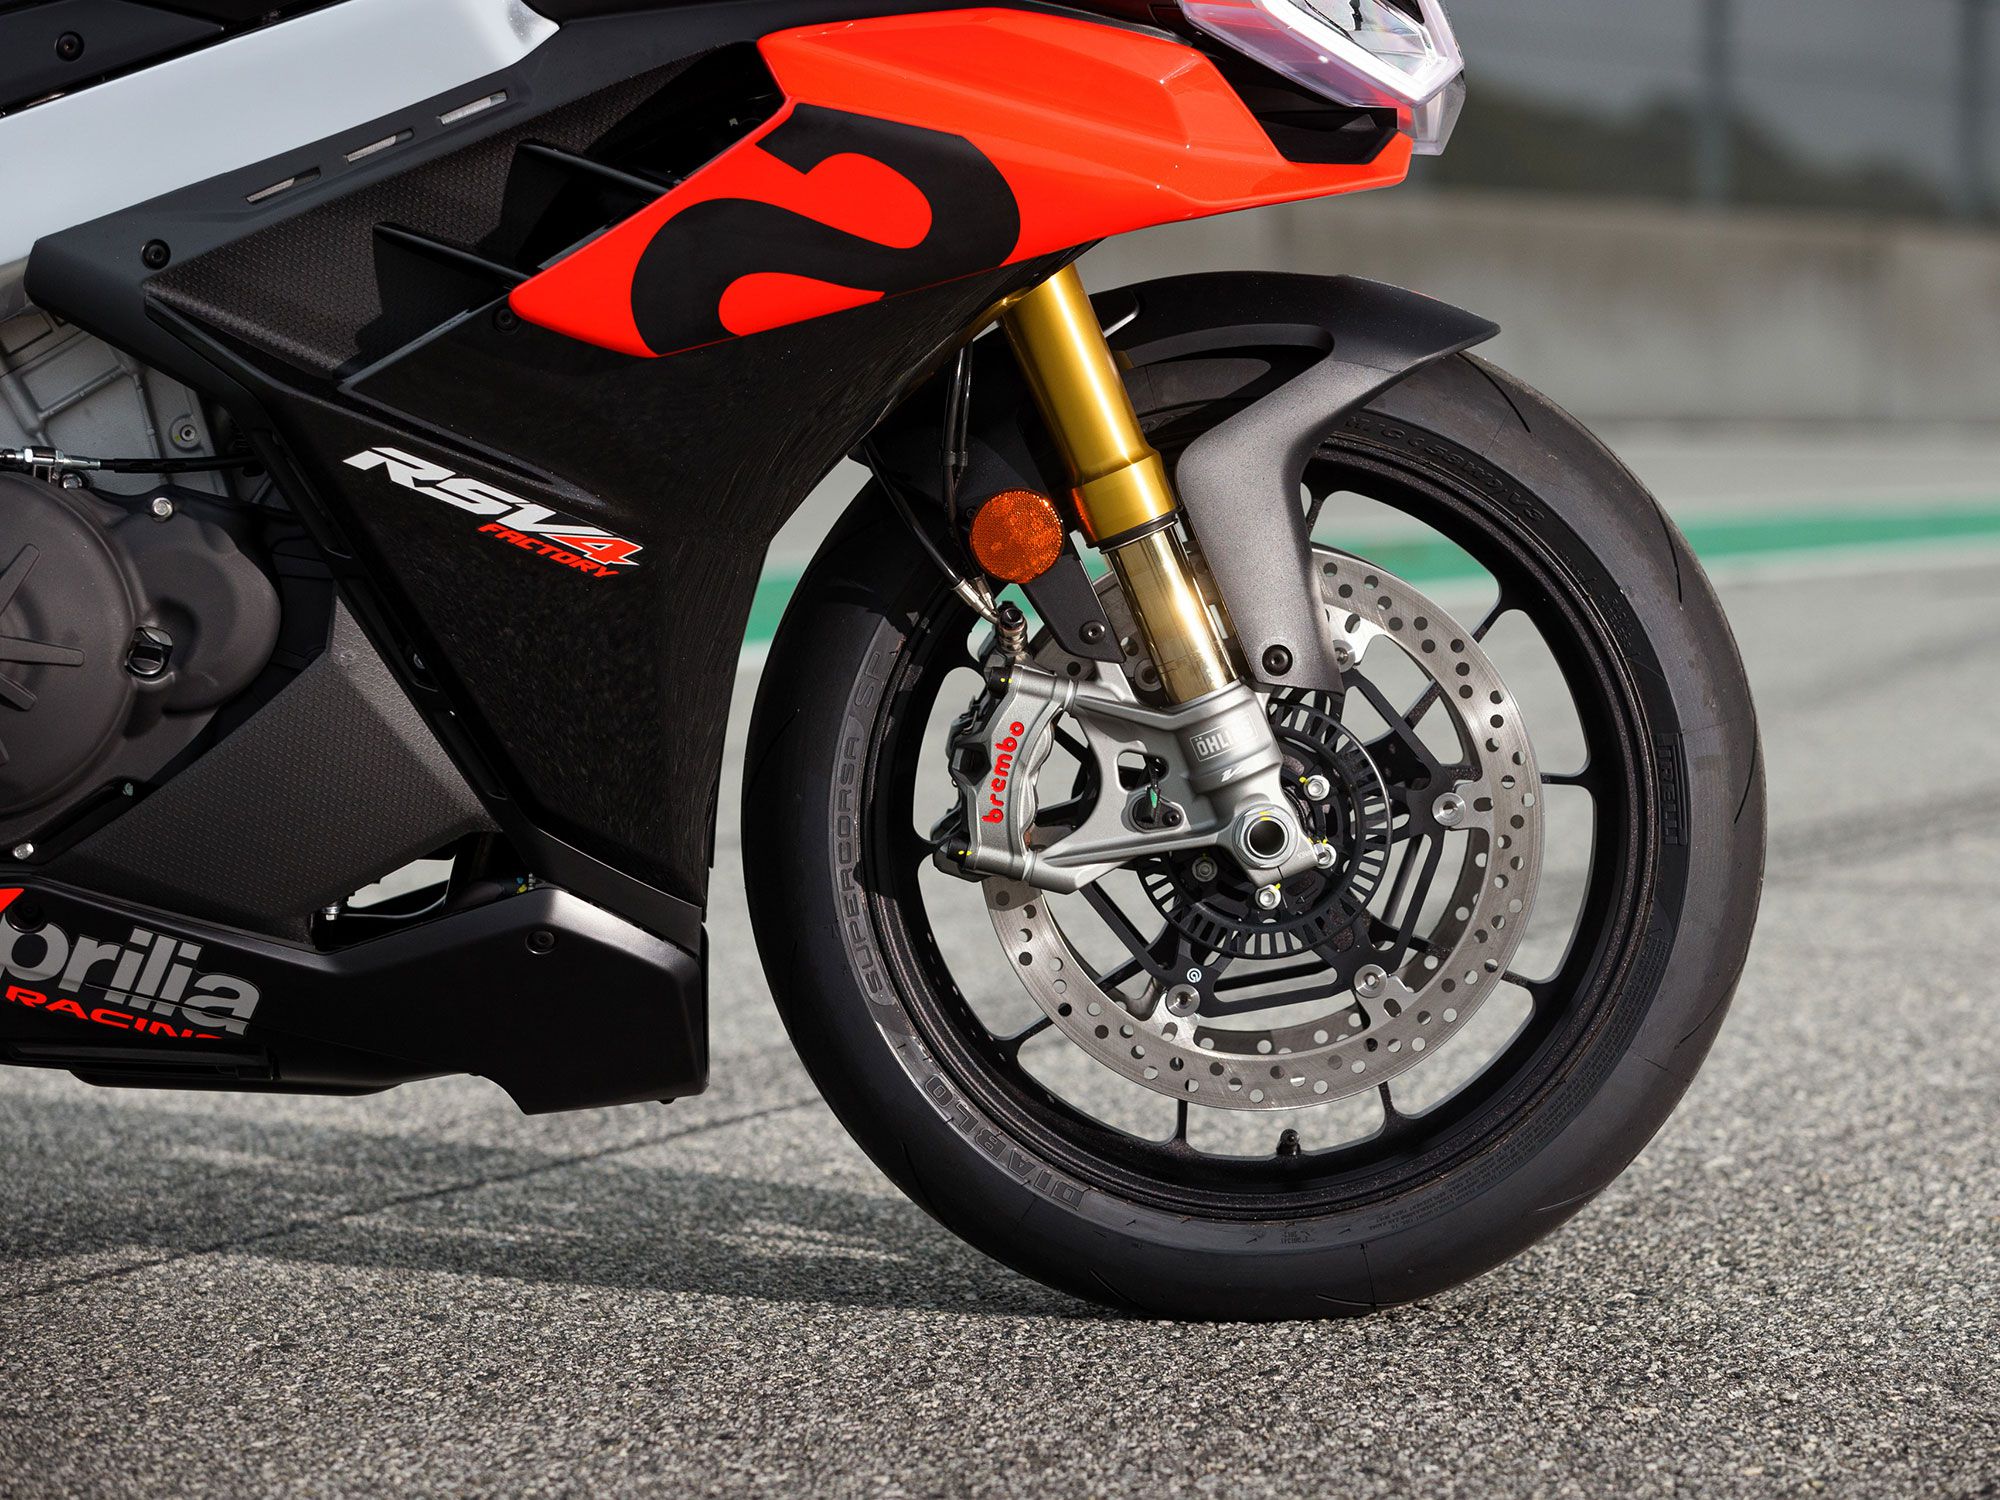 The RSV4 Factory benefits from Öhlins semi-active suspension and forged alloy wheels.